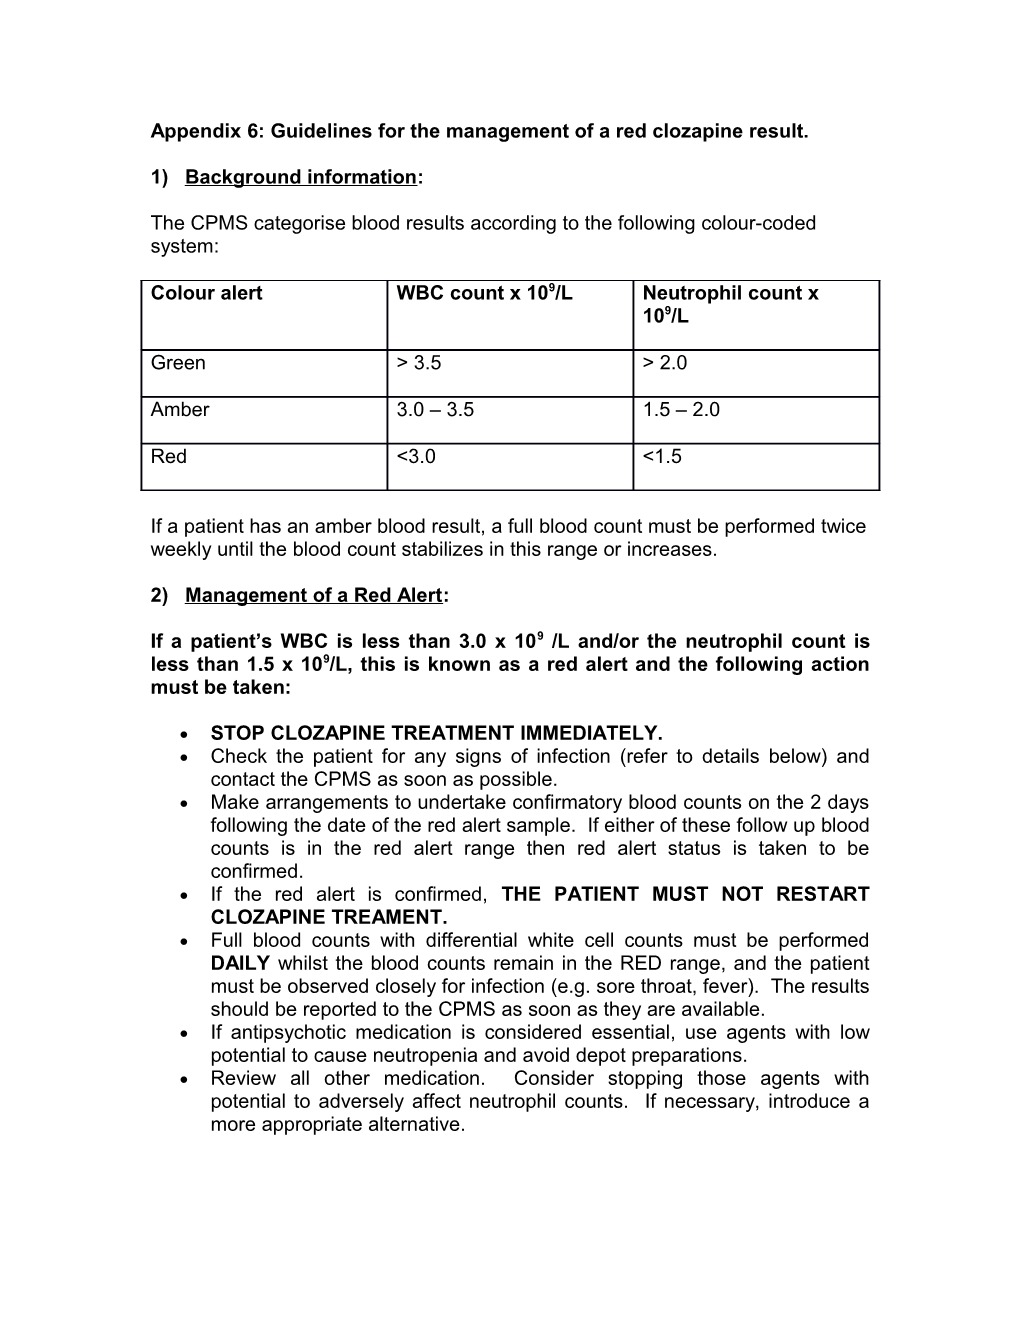 Appendix 6: Guidelines for the Management of a Red Clozapine Result